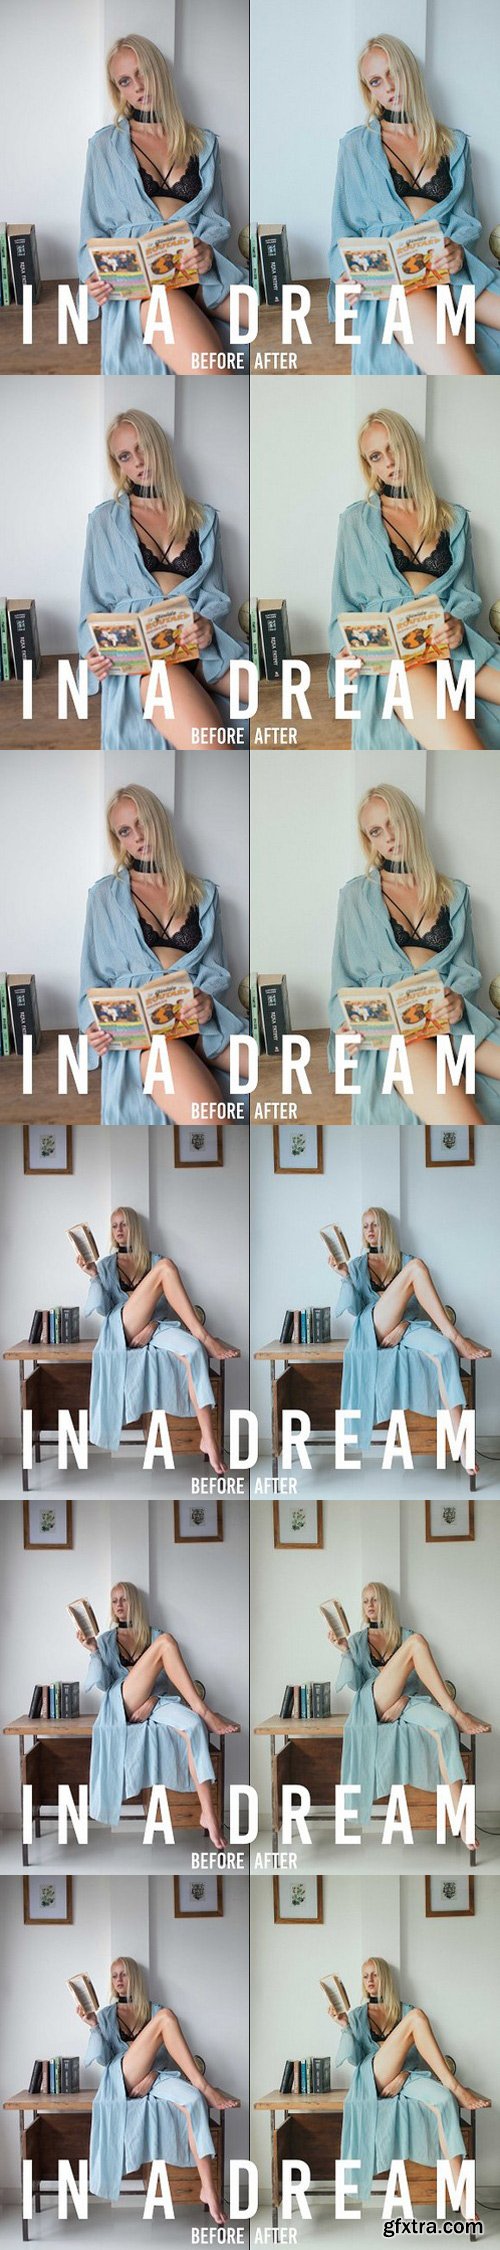 CM - In A Dream // Lifestyle LR Presets 1654133